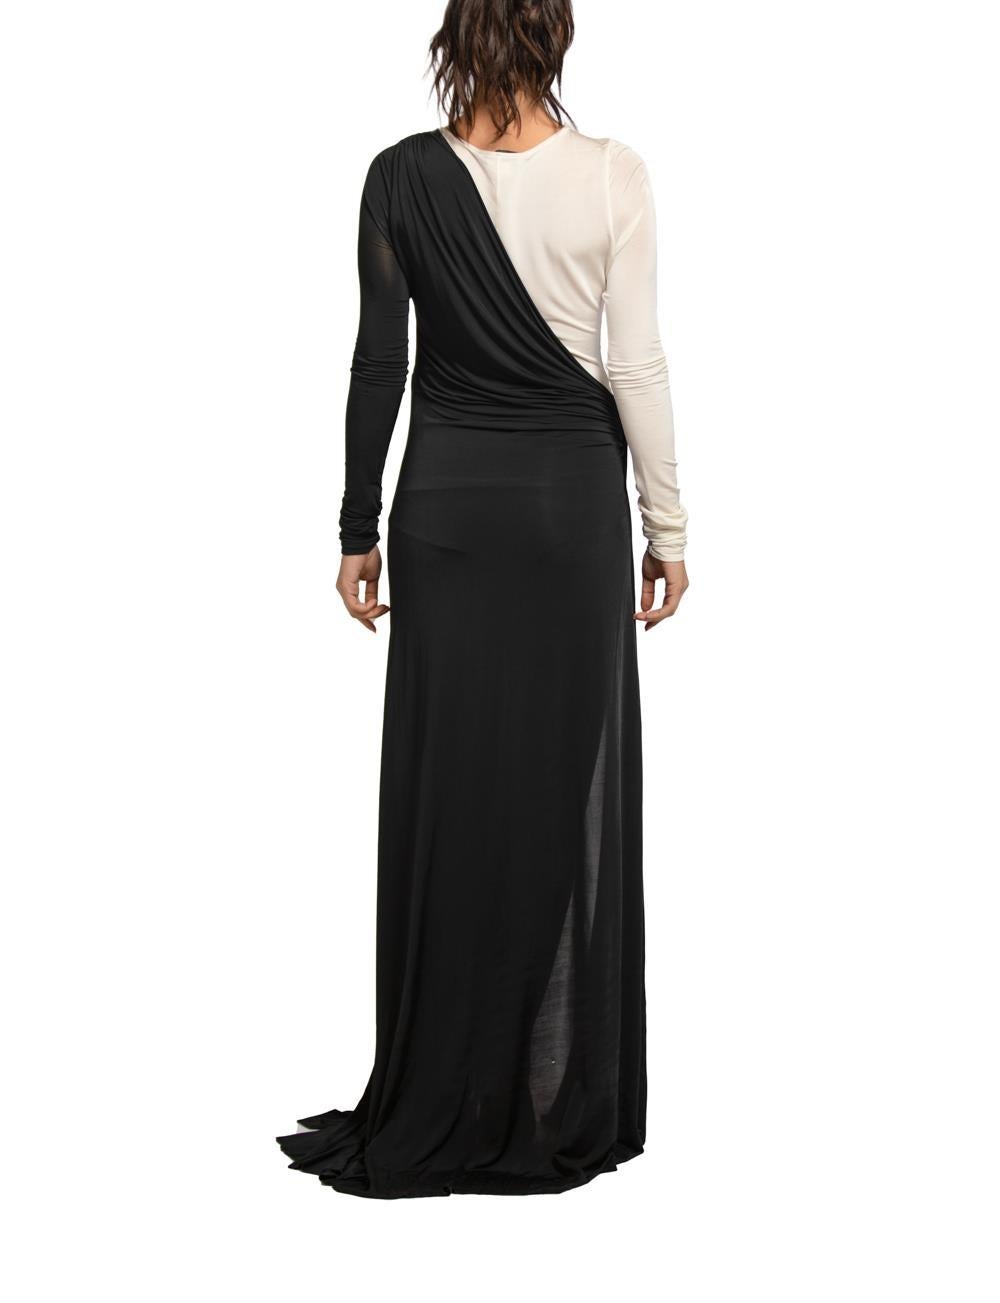 1990S PIERRE BALMAIN Black & White Rayon Jersey Long Sleeved Gown For Sale 4